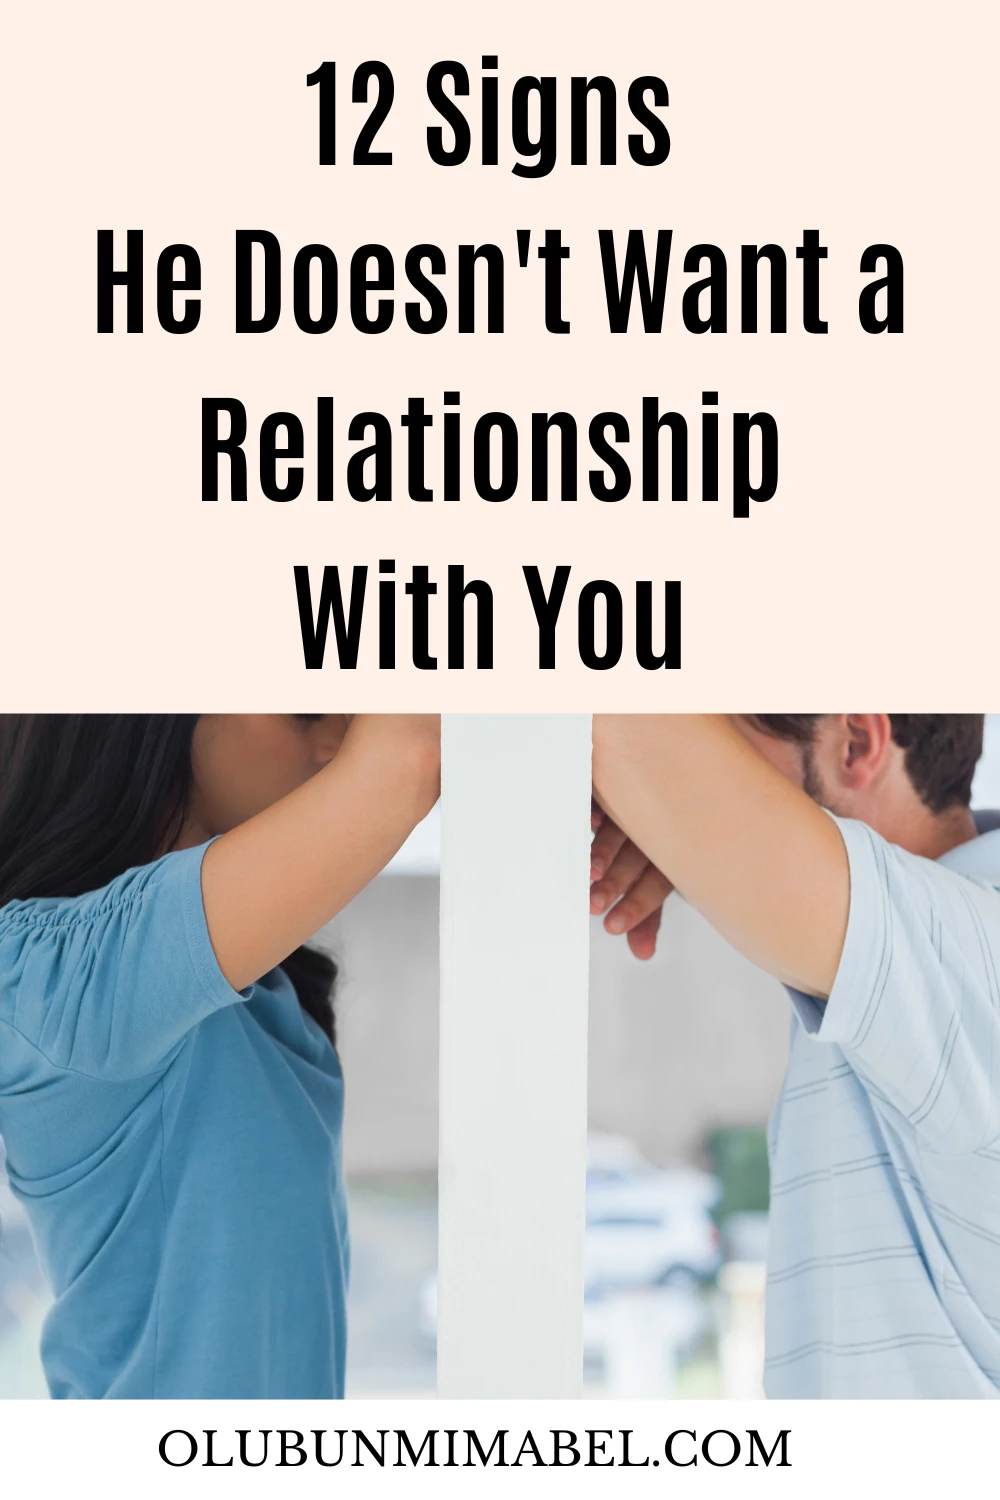 Signs He Doesn't Want A Relationship With You